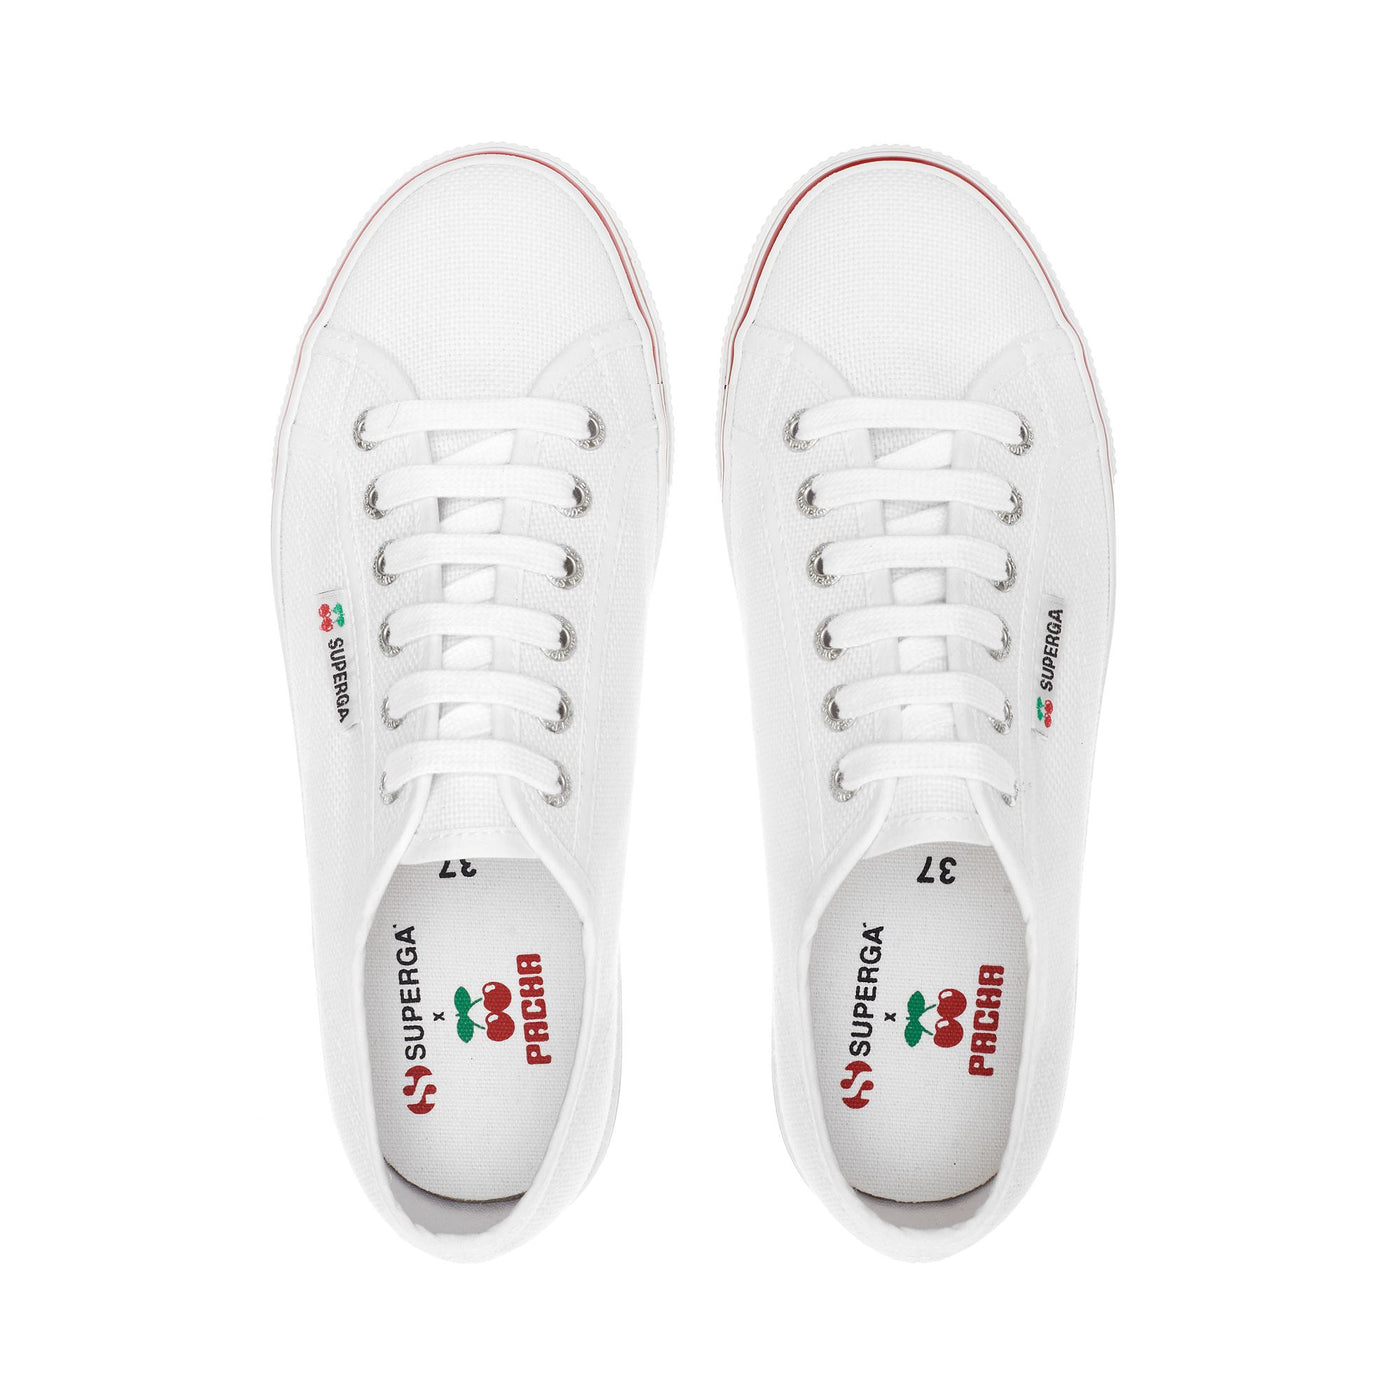 Le Superga Unisex 2790 CHERRY SOLE Low Cut WHITE - RED BERRY Dressed Back (jpg Rgb)		